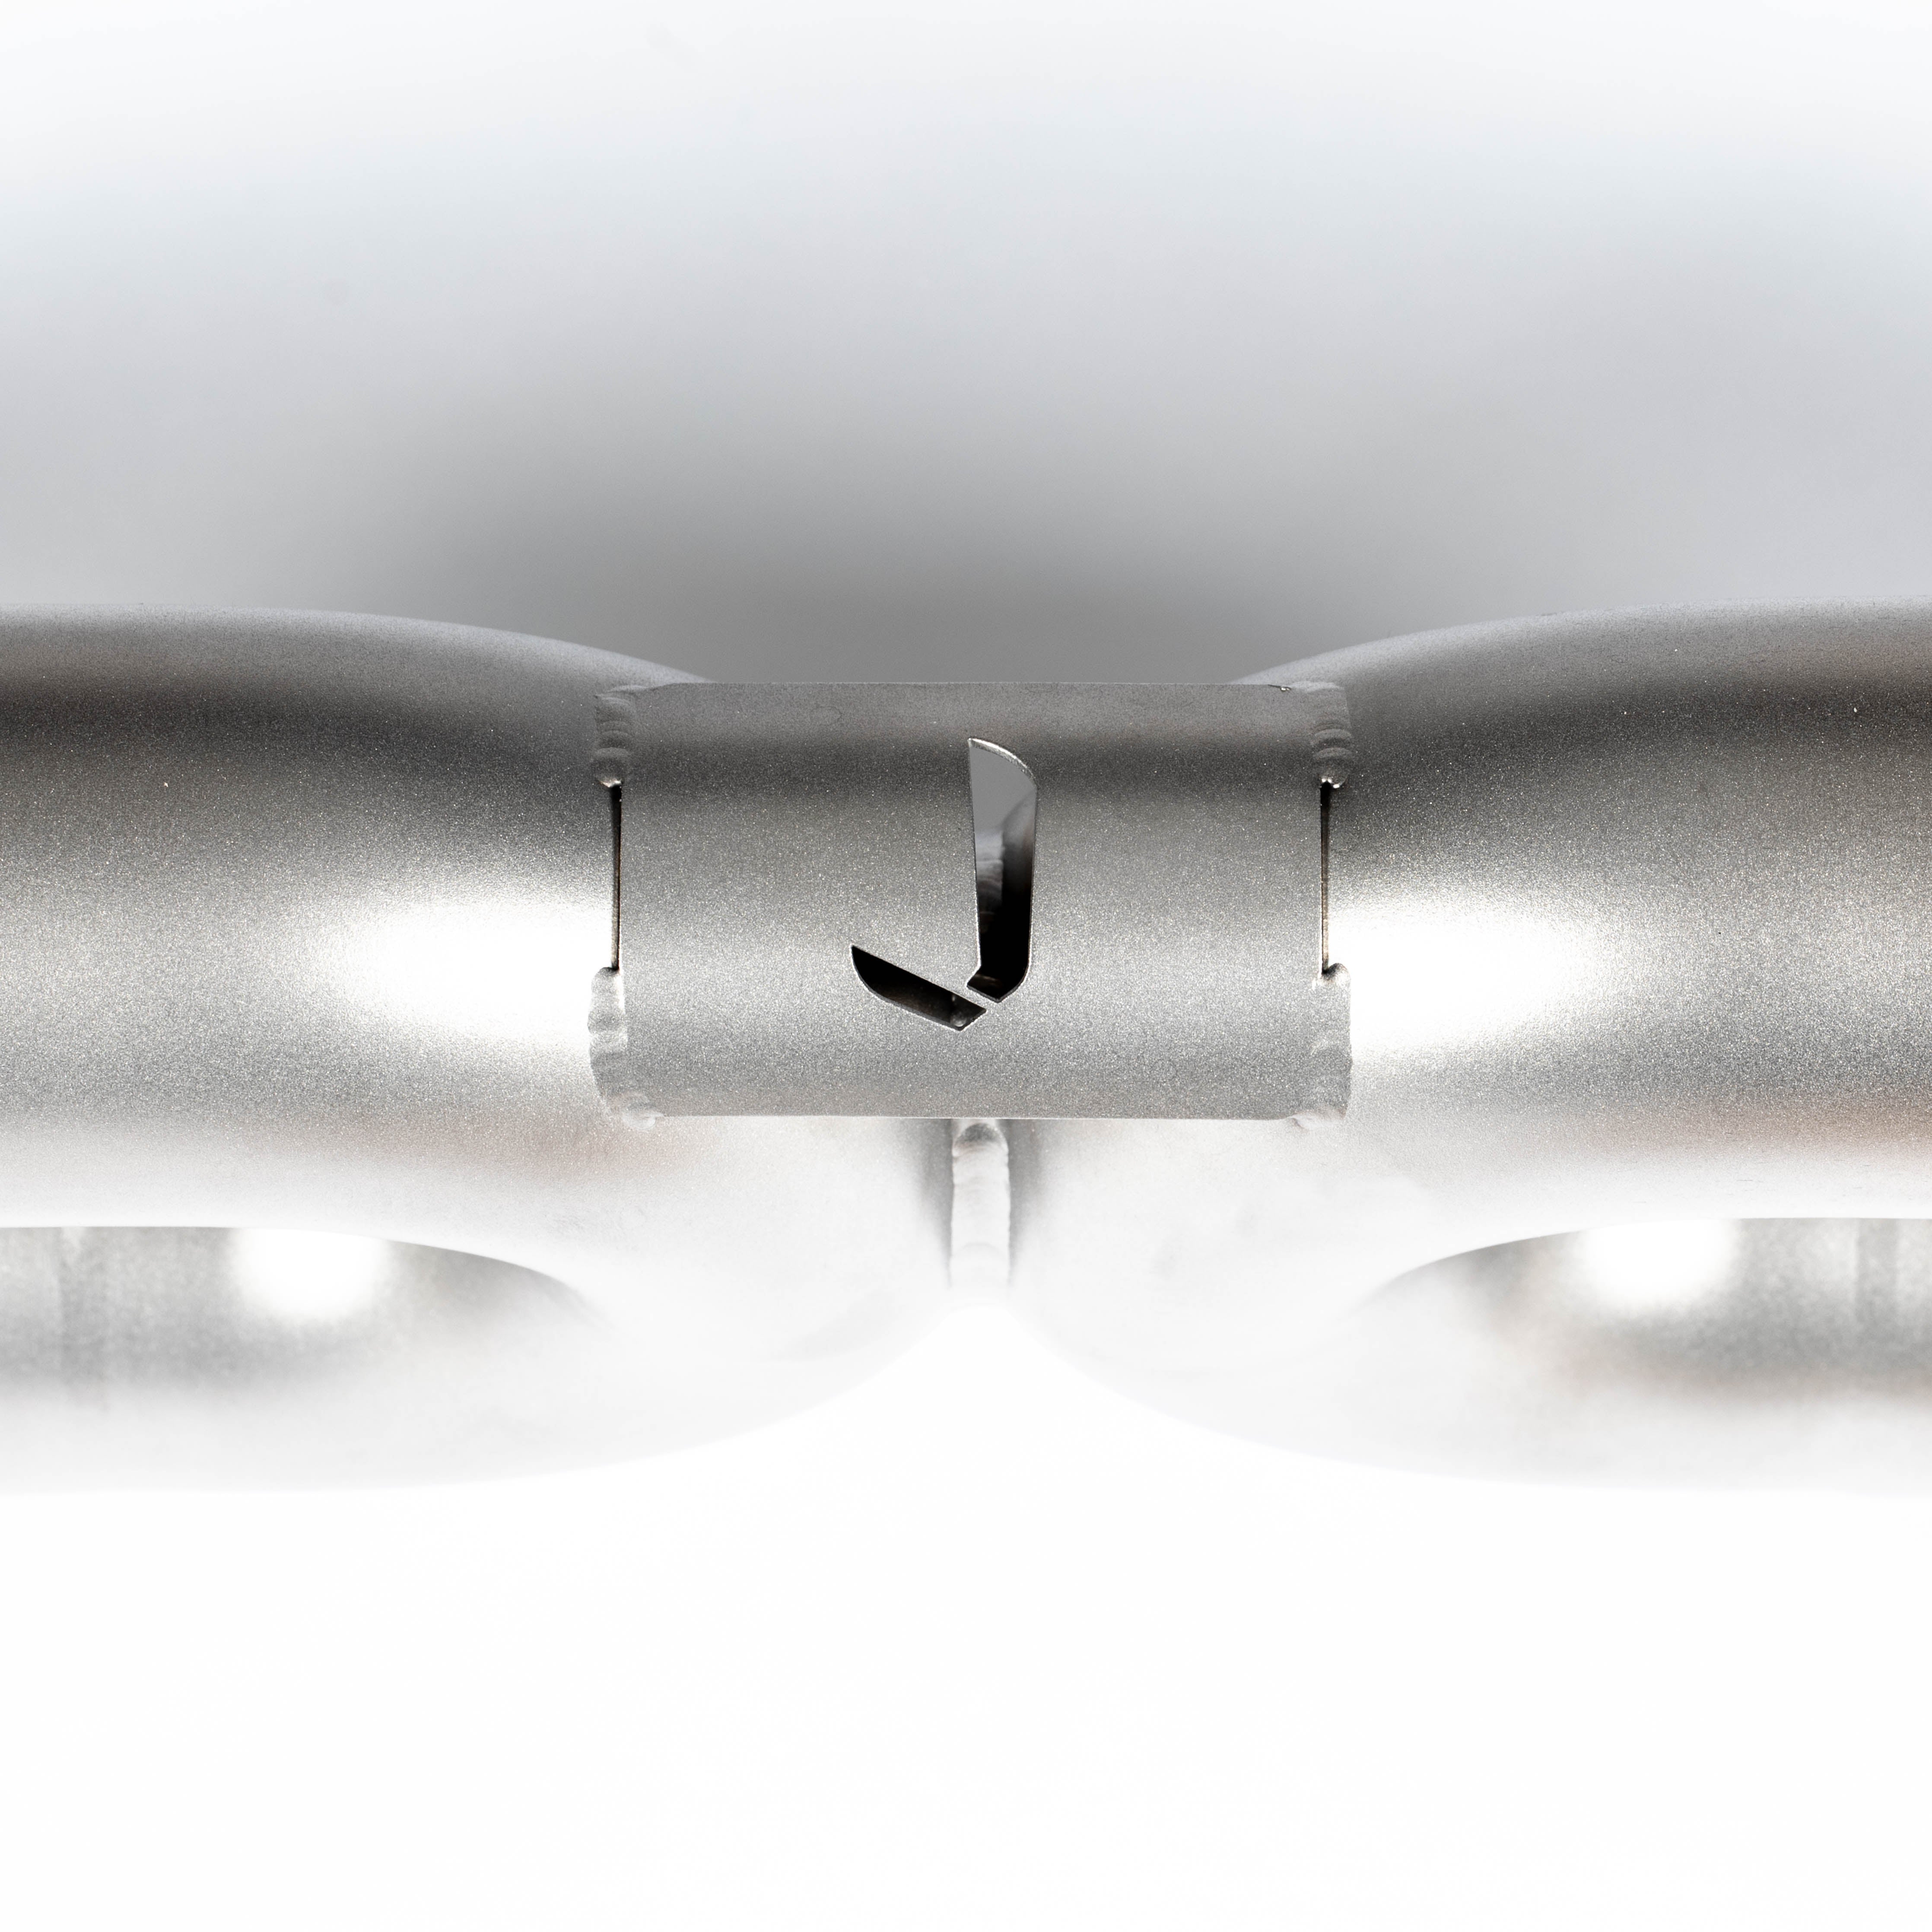 TITANIUM SUPERLIGHT RACE PIPE (CATTED / SILENCED)